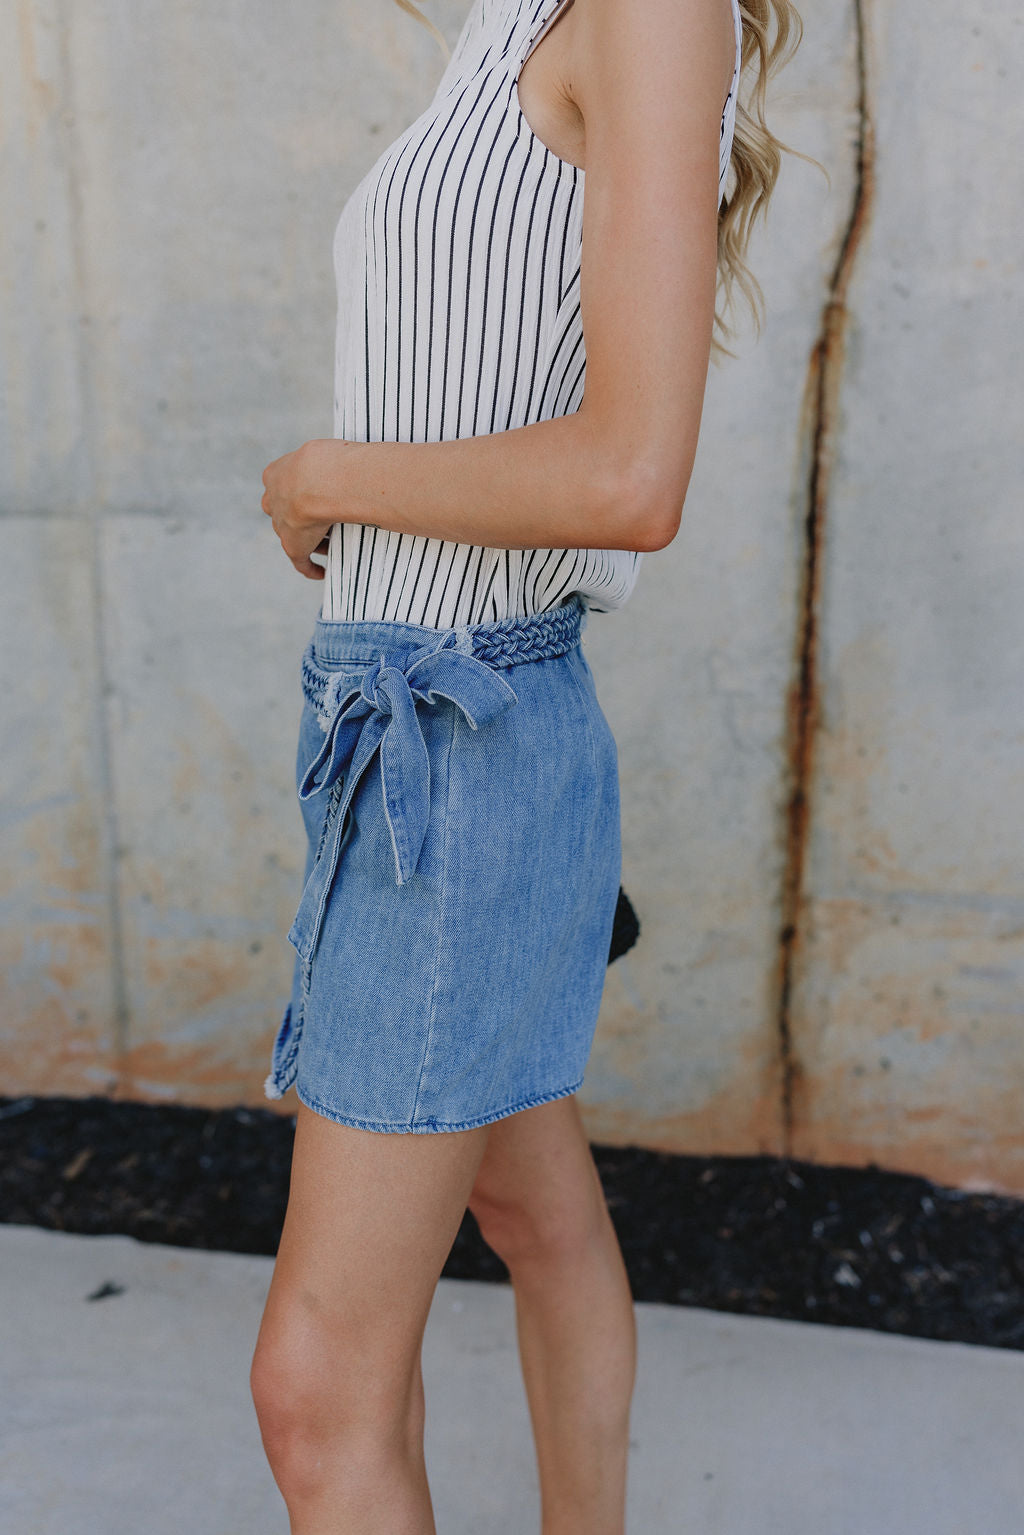 Side view of Molly Medium Wash Denim Skort that has braid details across and a cute tie on the side.